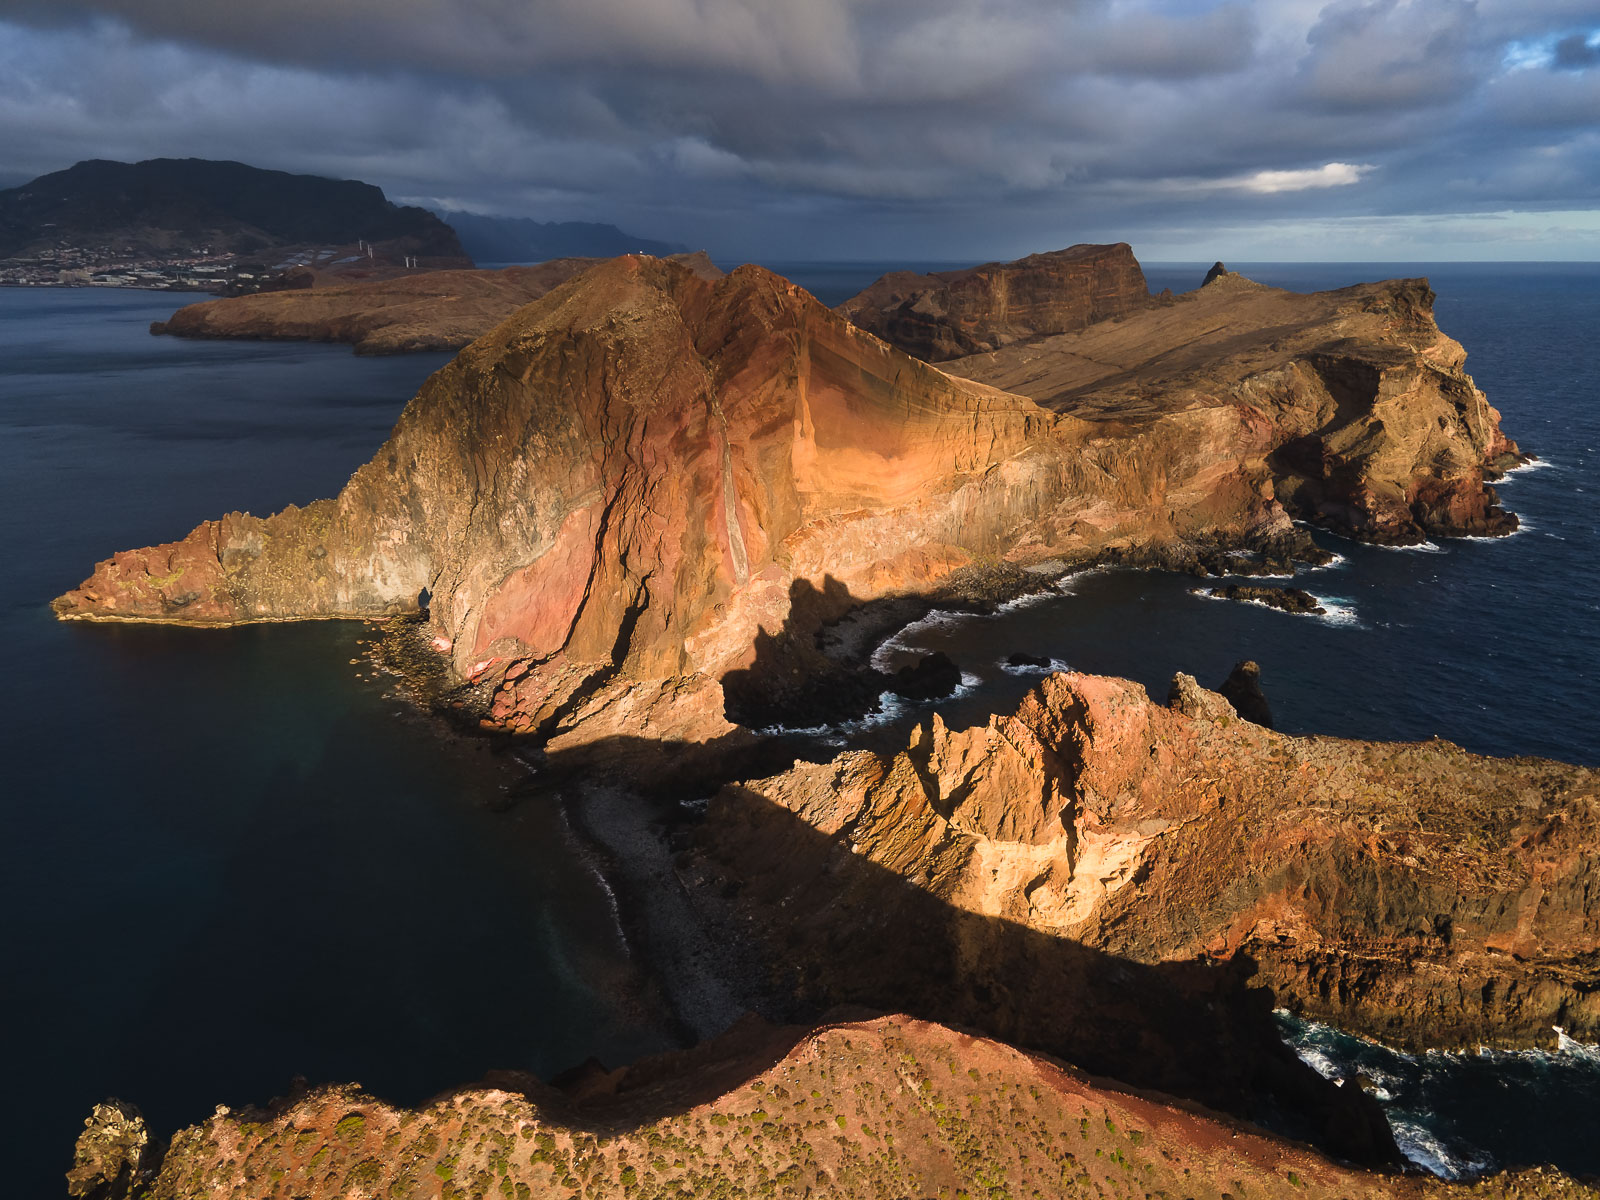 View of the eastern side of Madeira at sunrise.